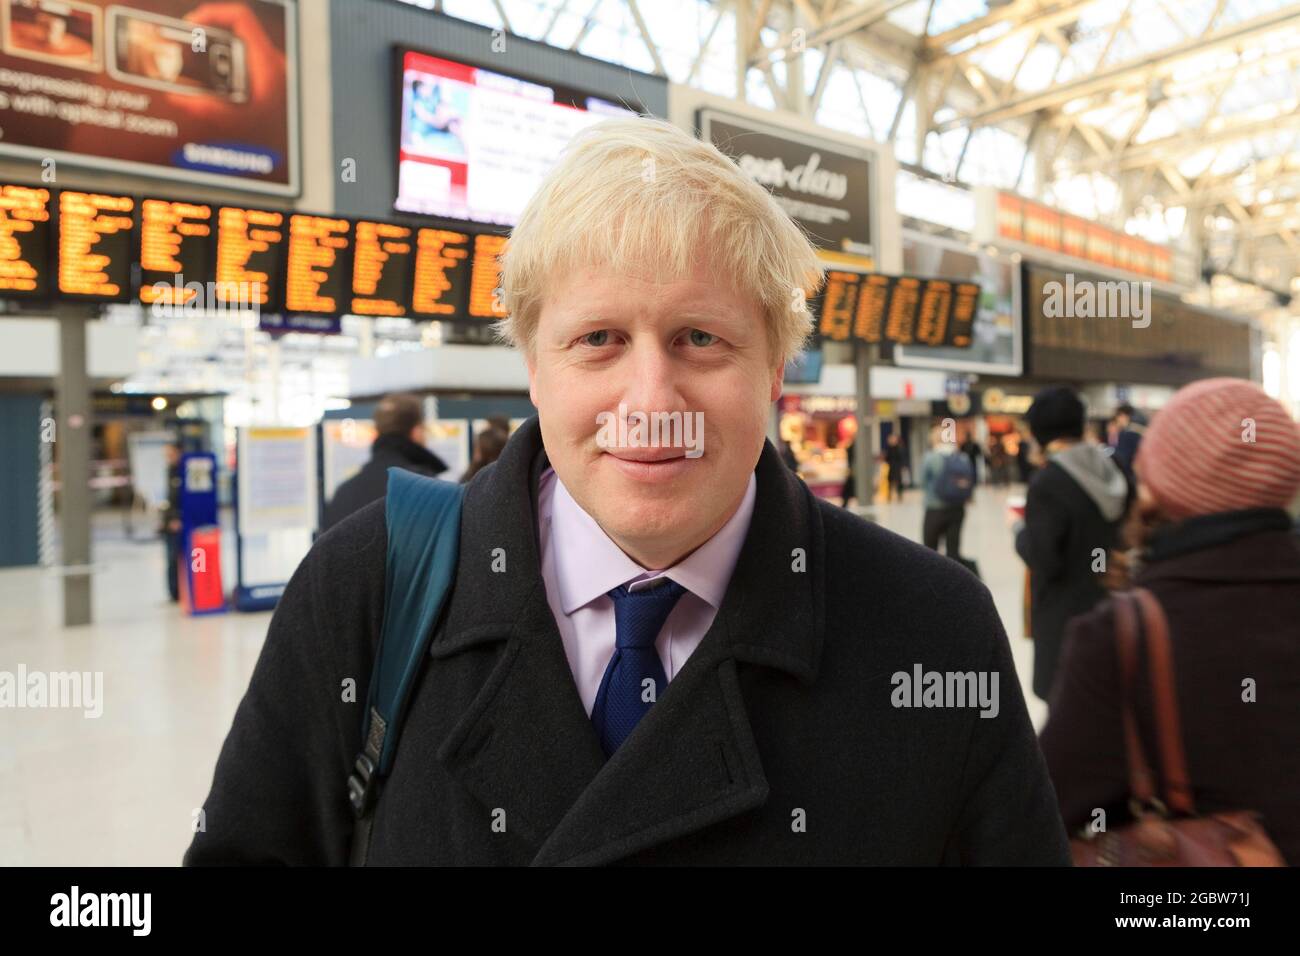 Boris Johnson, conservative candidate for Mayor of London at Waterloo Station after traveling up to Waterloo East on 7.56 from Crayford. His journey was to see what traveling conditions are like rail commuters coming from southern suburbs into central London.  Waterloo Station, London, UK.  25 Feb 2008 Stock Photo